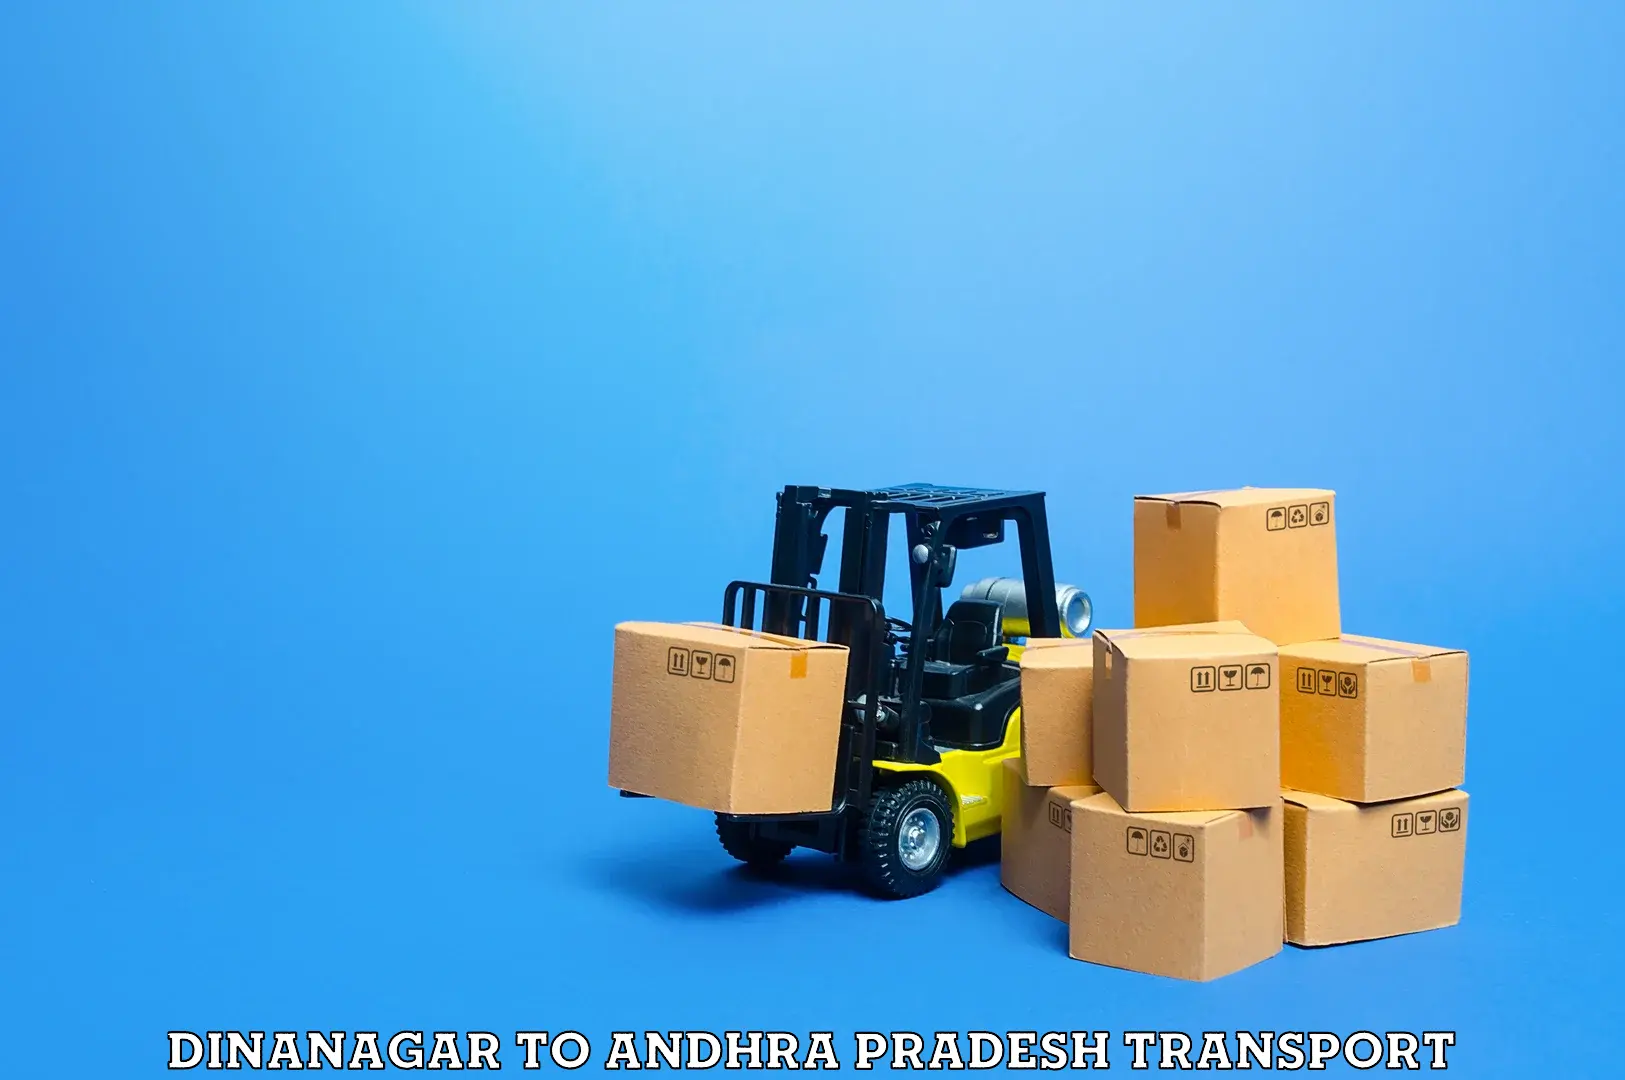 Commercial transport service Dinanagar to Nellore